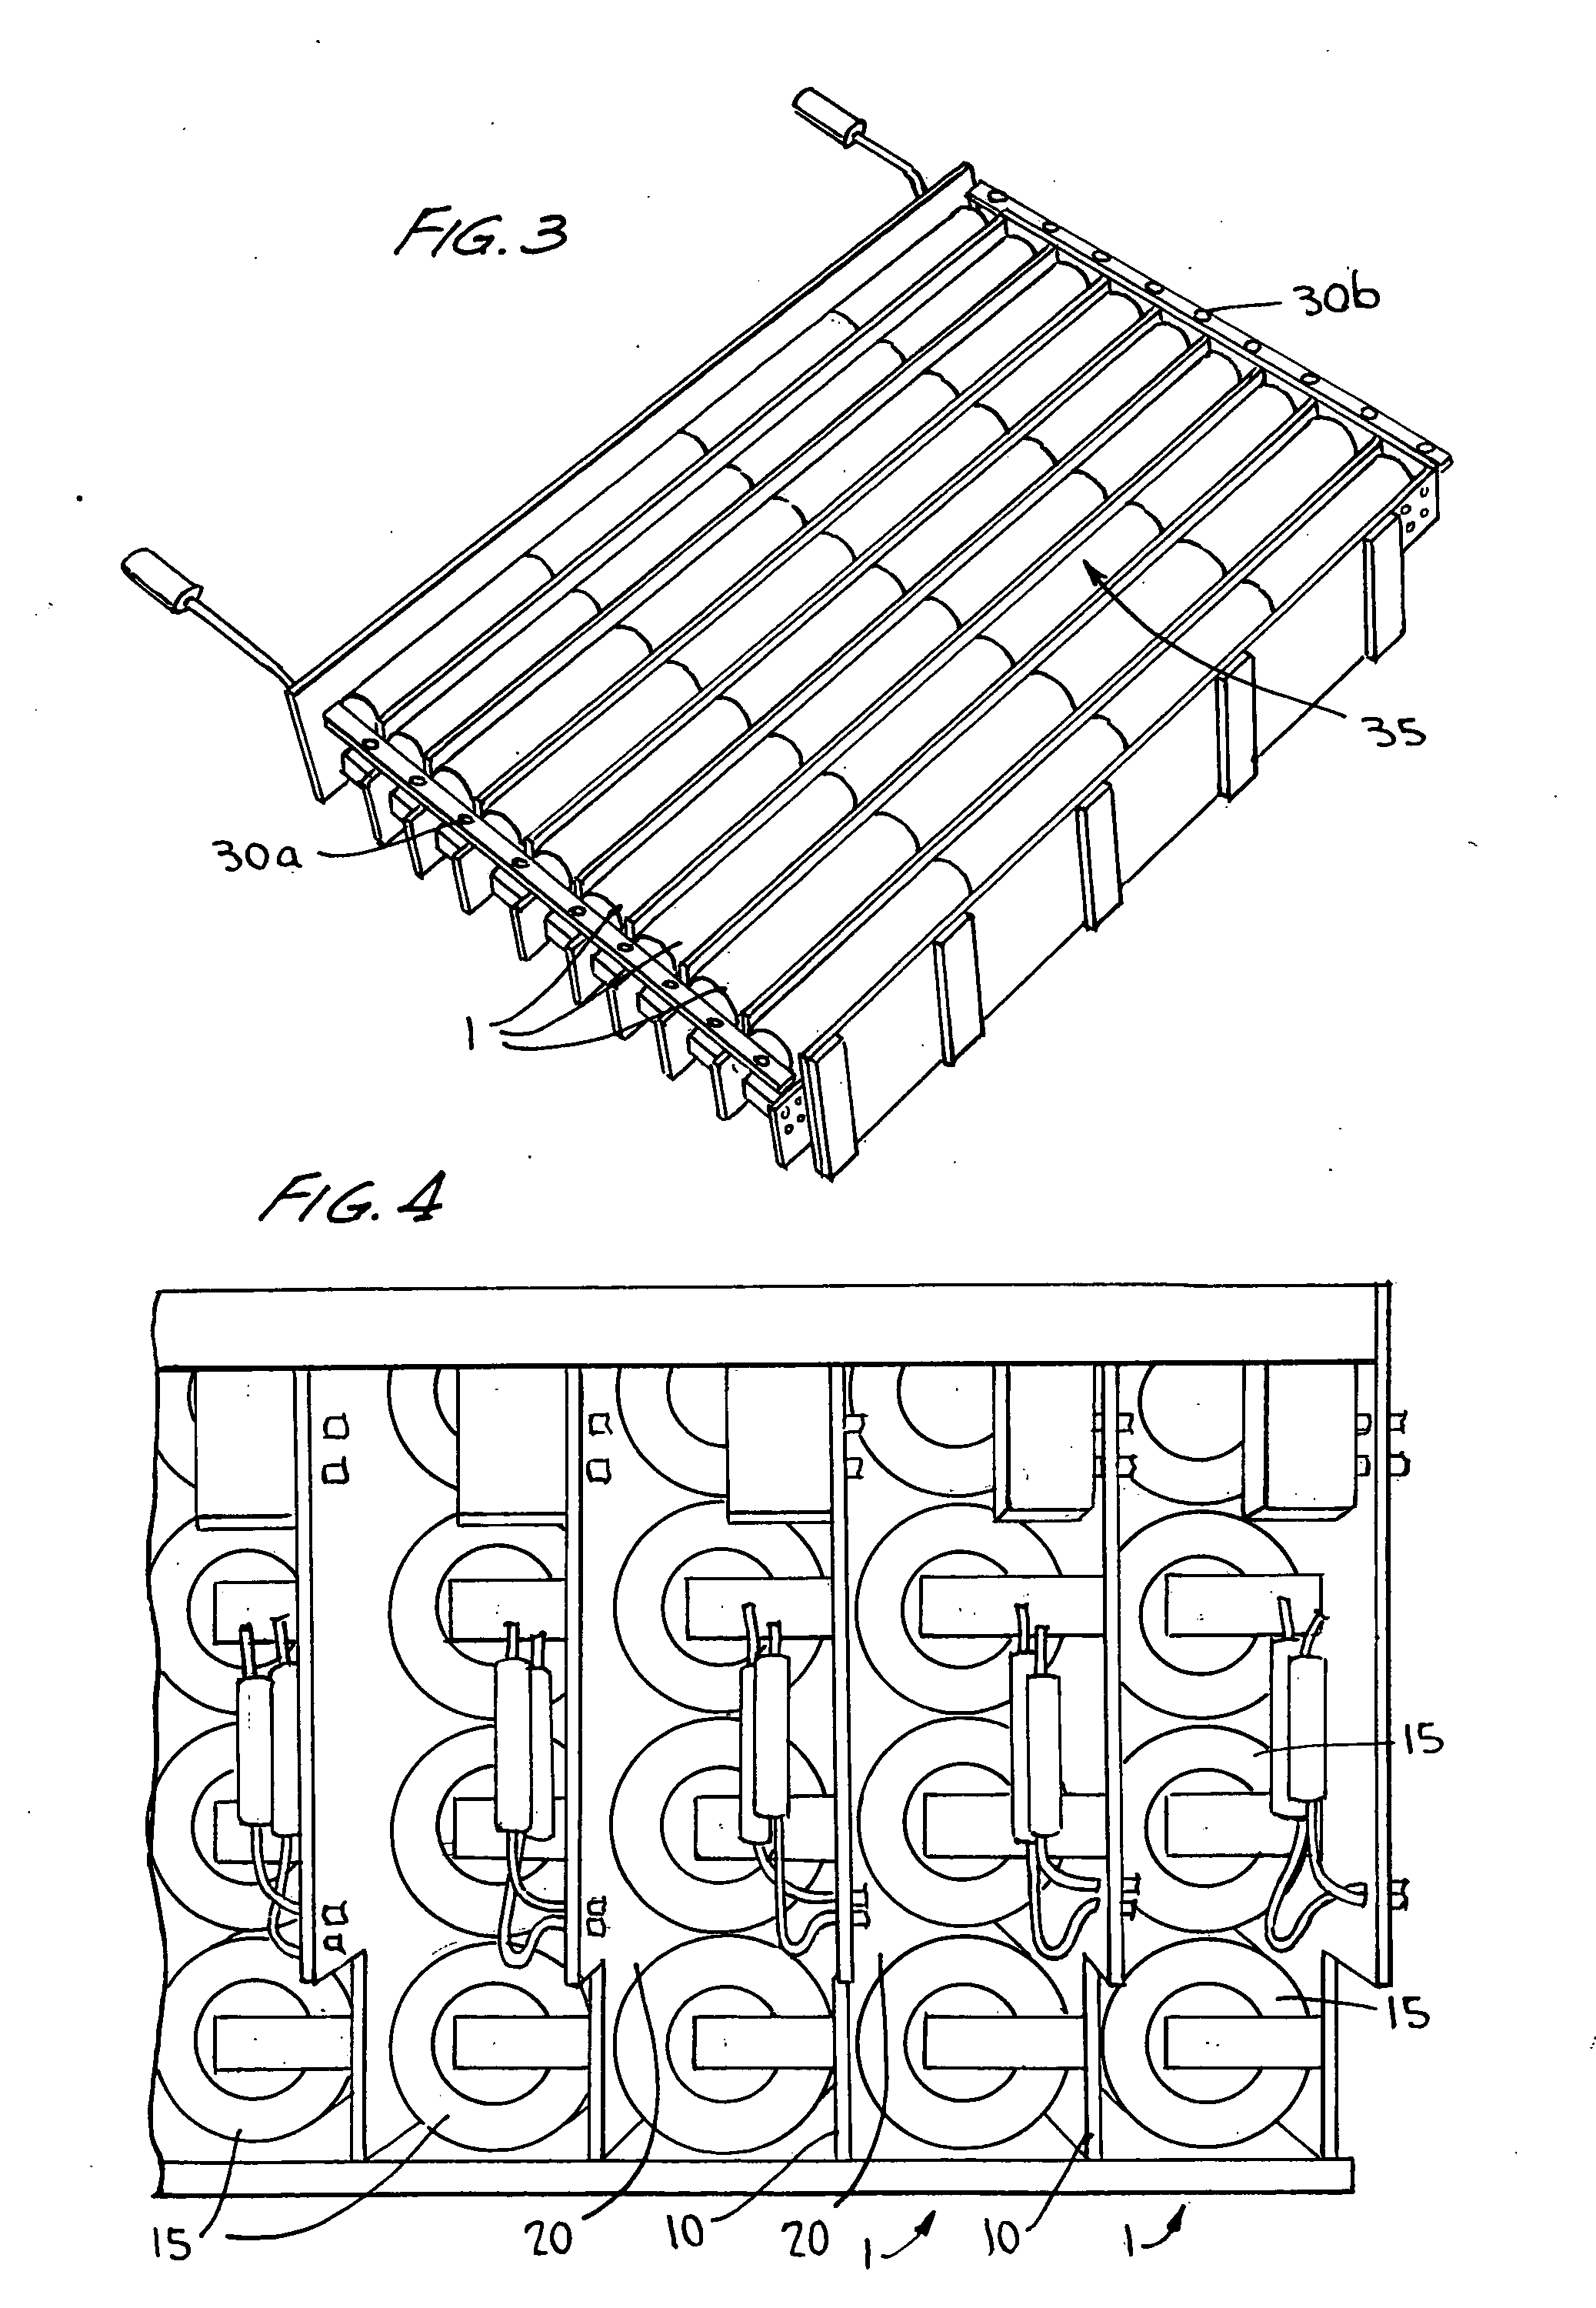 Methods and systems for assembling batteries